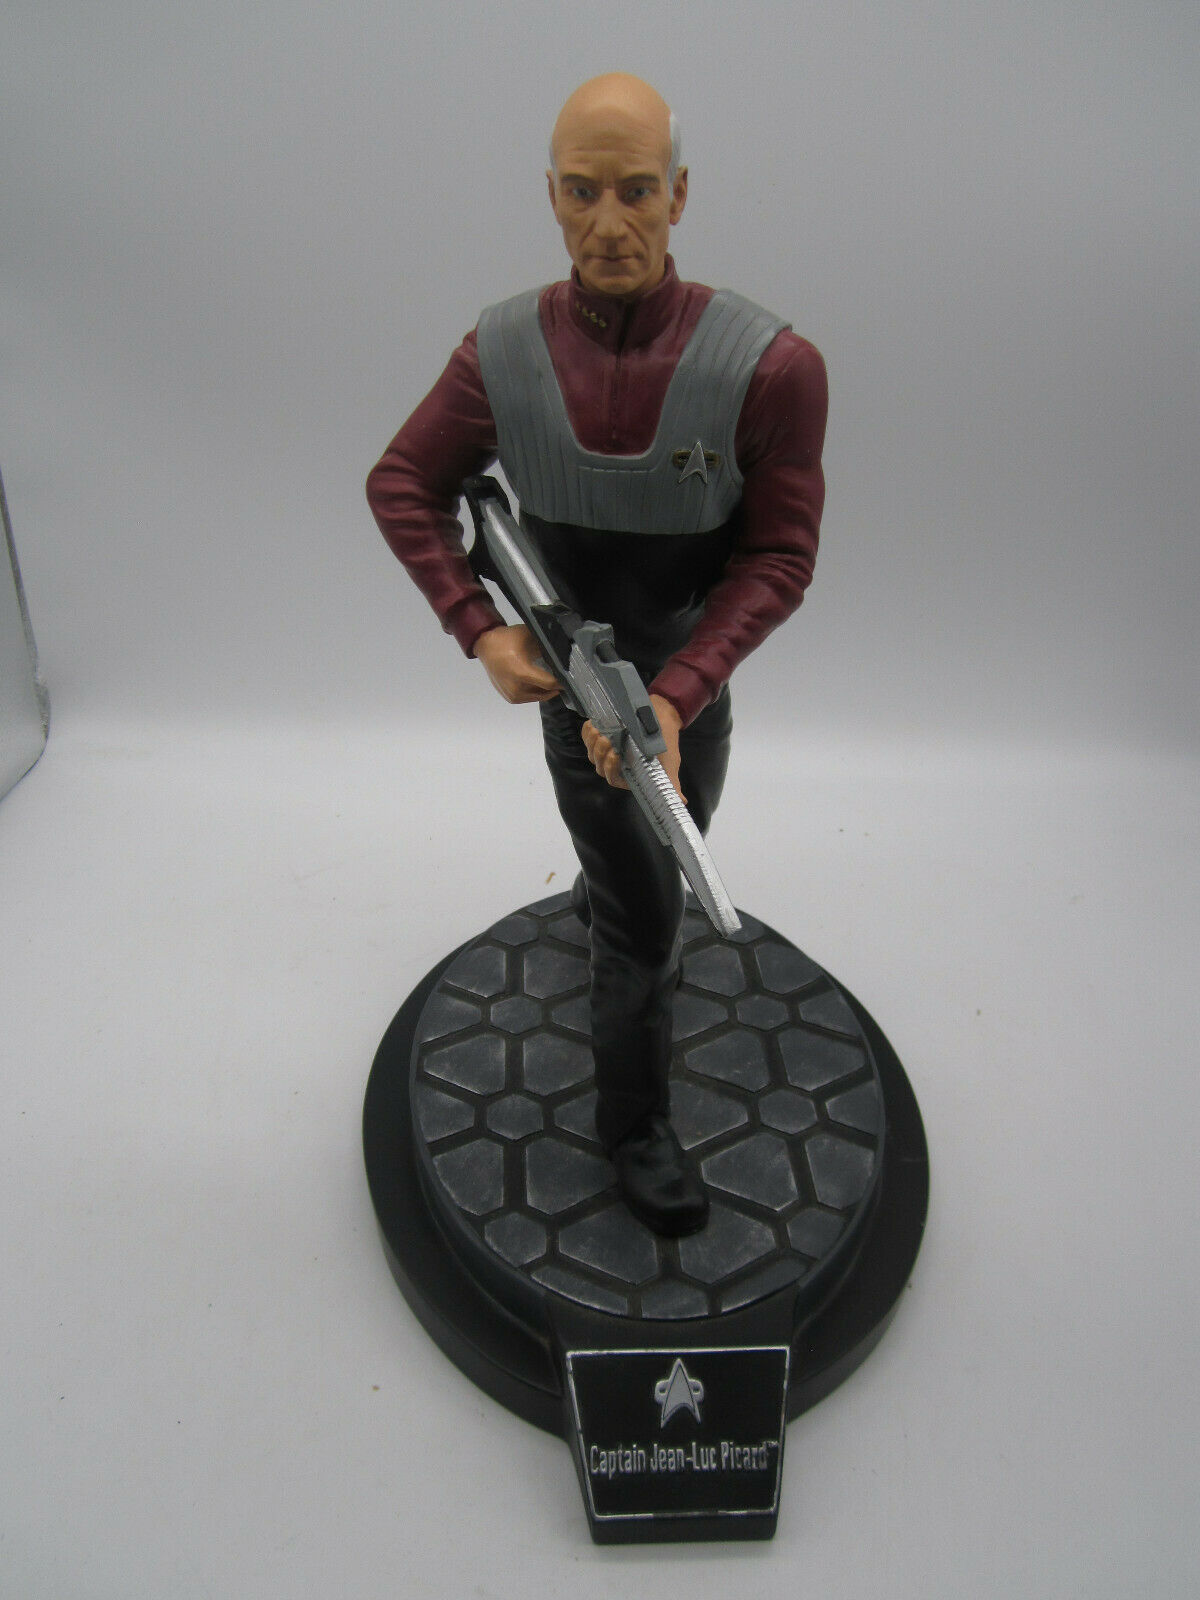 Playmates Captain Jean-luc Picard 12” Cold Cast Resin Figurine 1 Of 5000